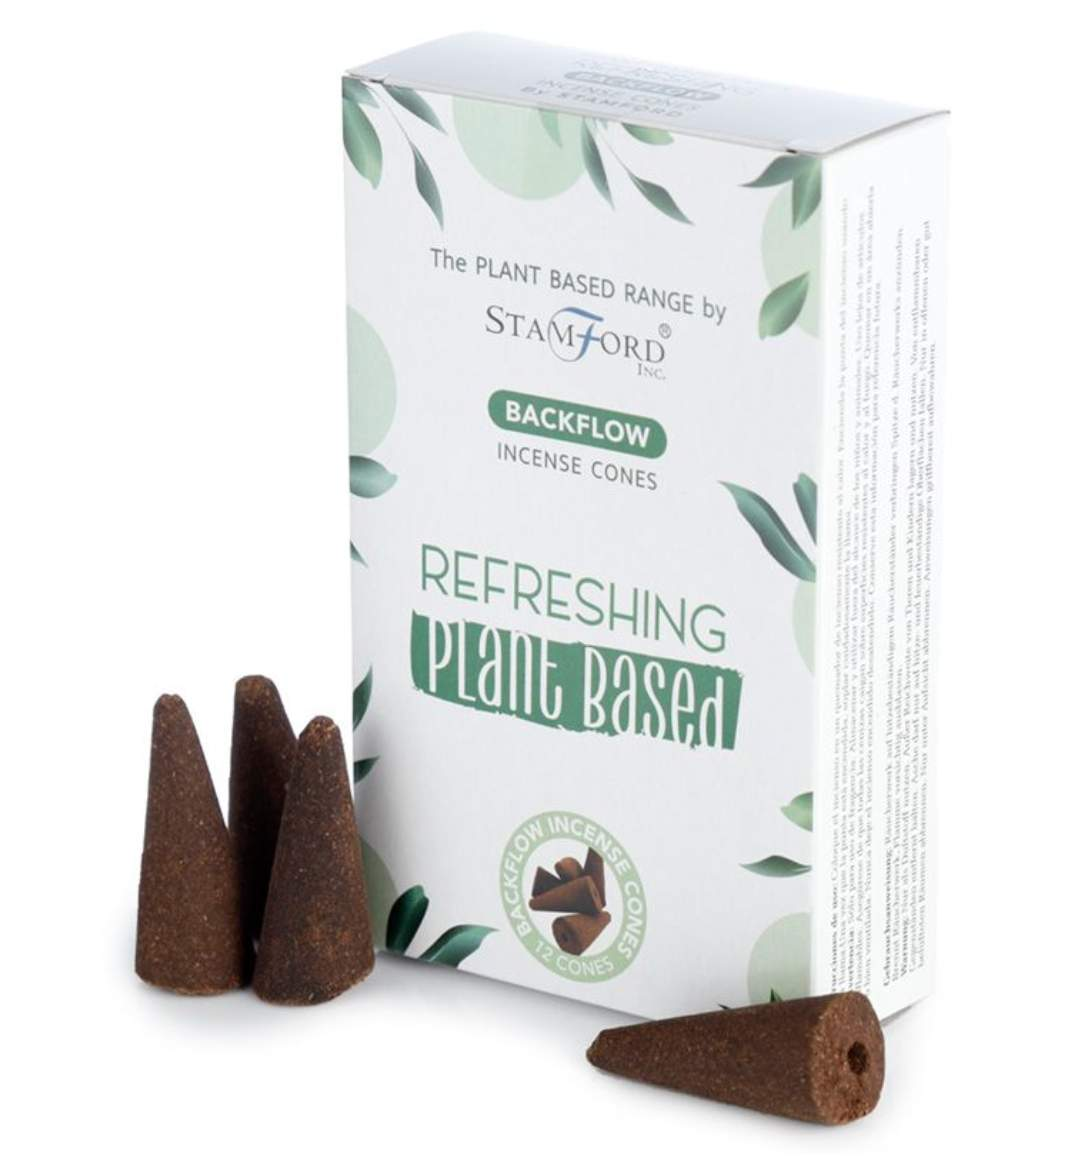 Refreshing Backflow Incense Cones-FREE Shipping over £35.00-